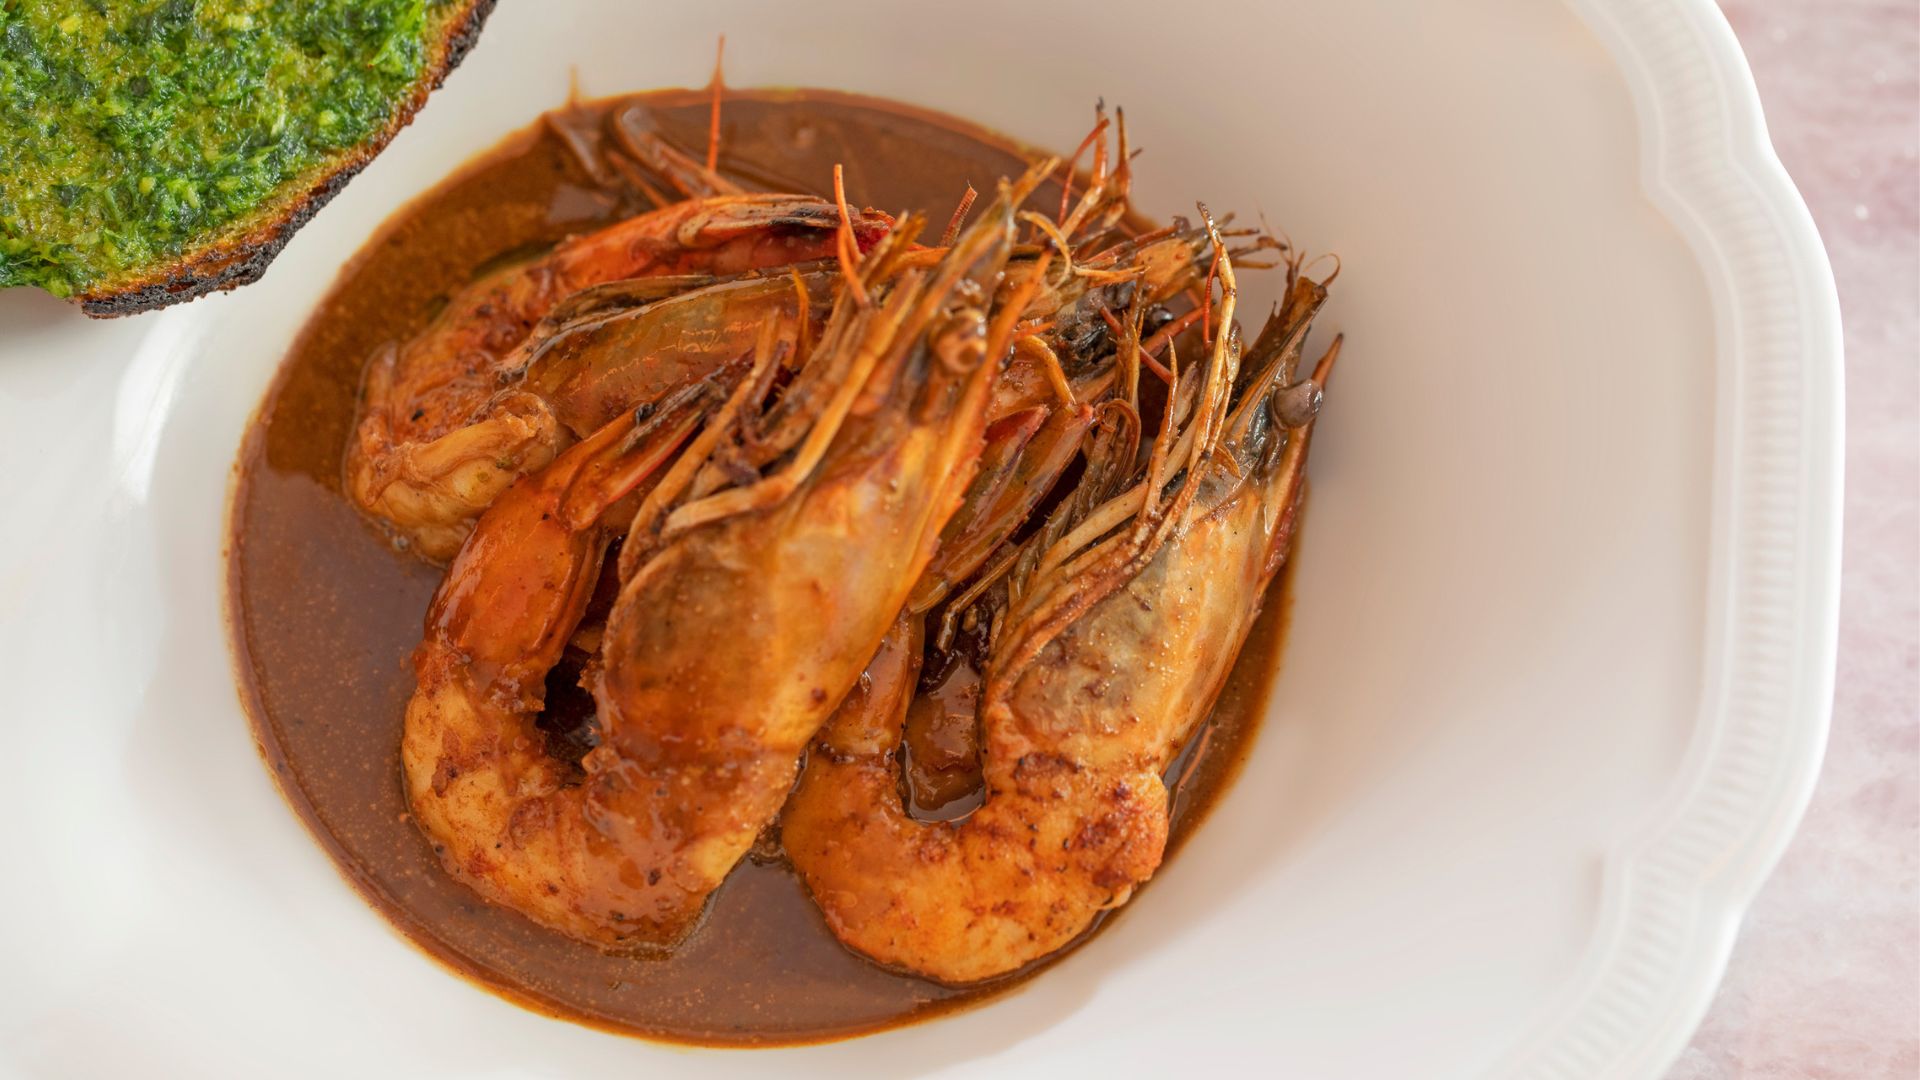 Four Seasons Hotel St. Louis will serve barbecue shrimp during its Mississippi Dinner Series.